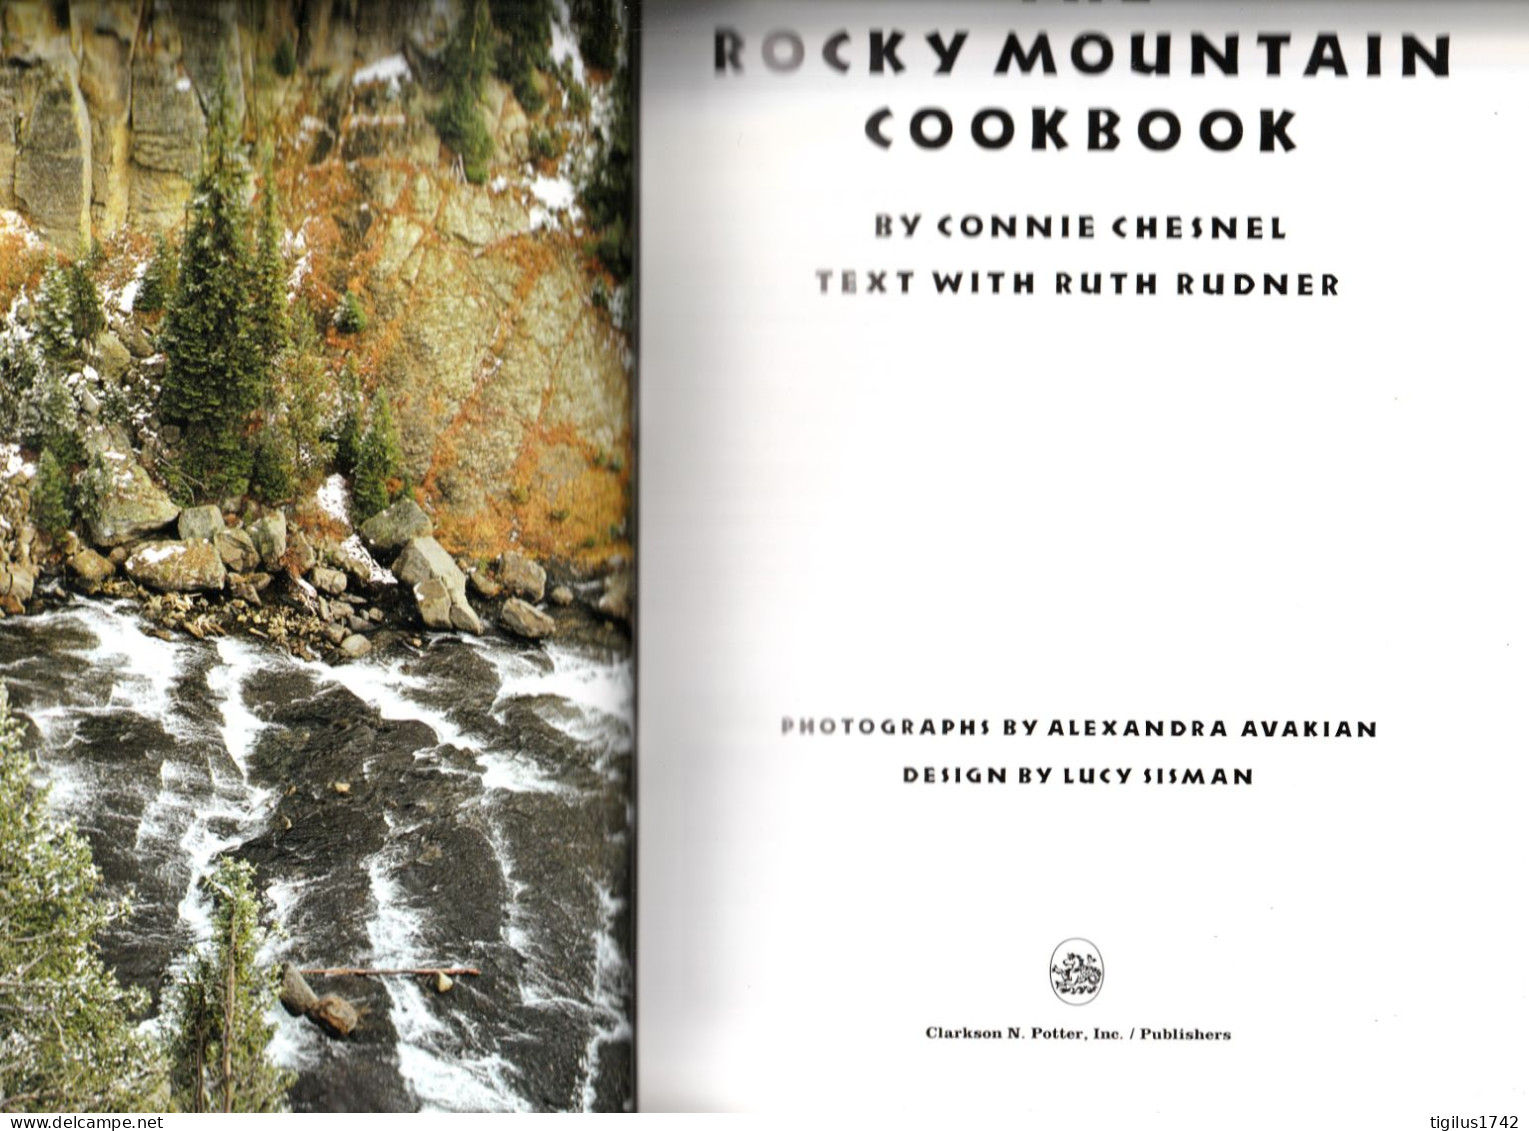 Chesnel Connie And Rudner Ruth. The Rocky Mountain Cookbook. Potter éd., 1988 - Nordamerika